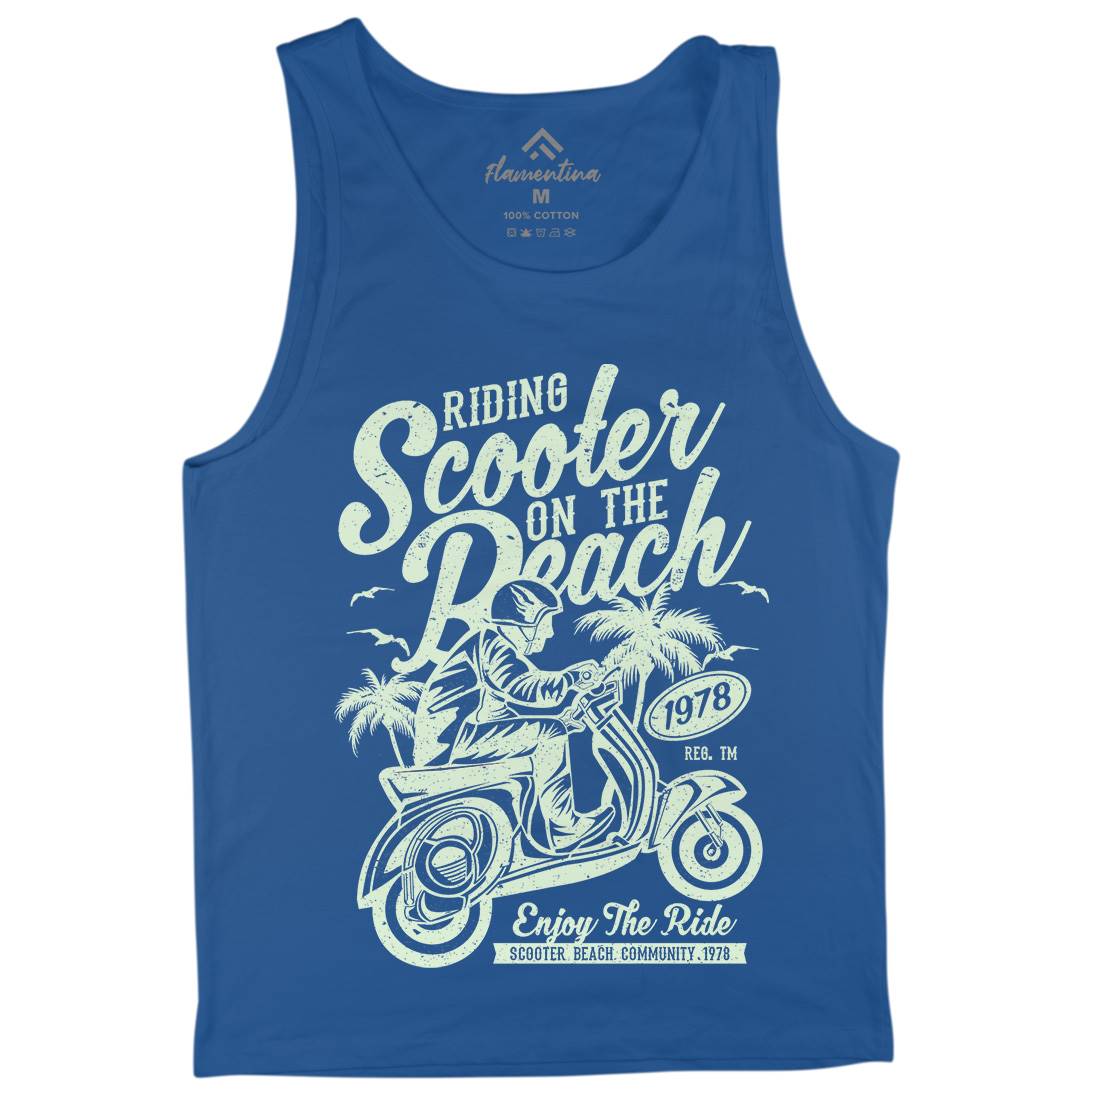 Scooter Beach Mens Tank Top Vest Motorcycles A134